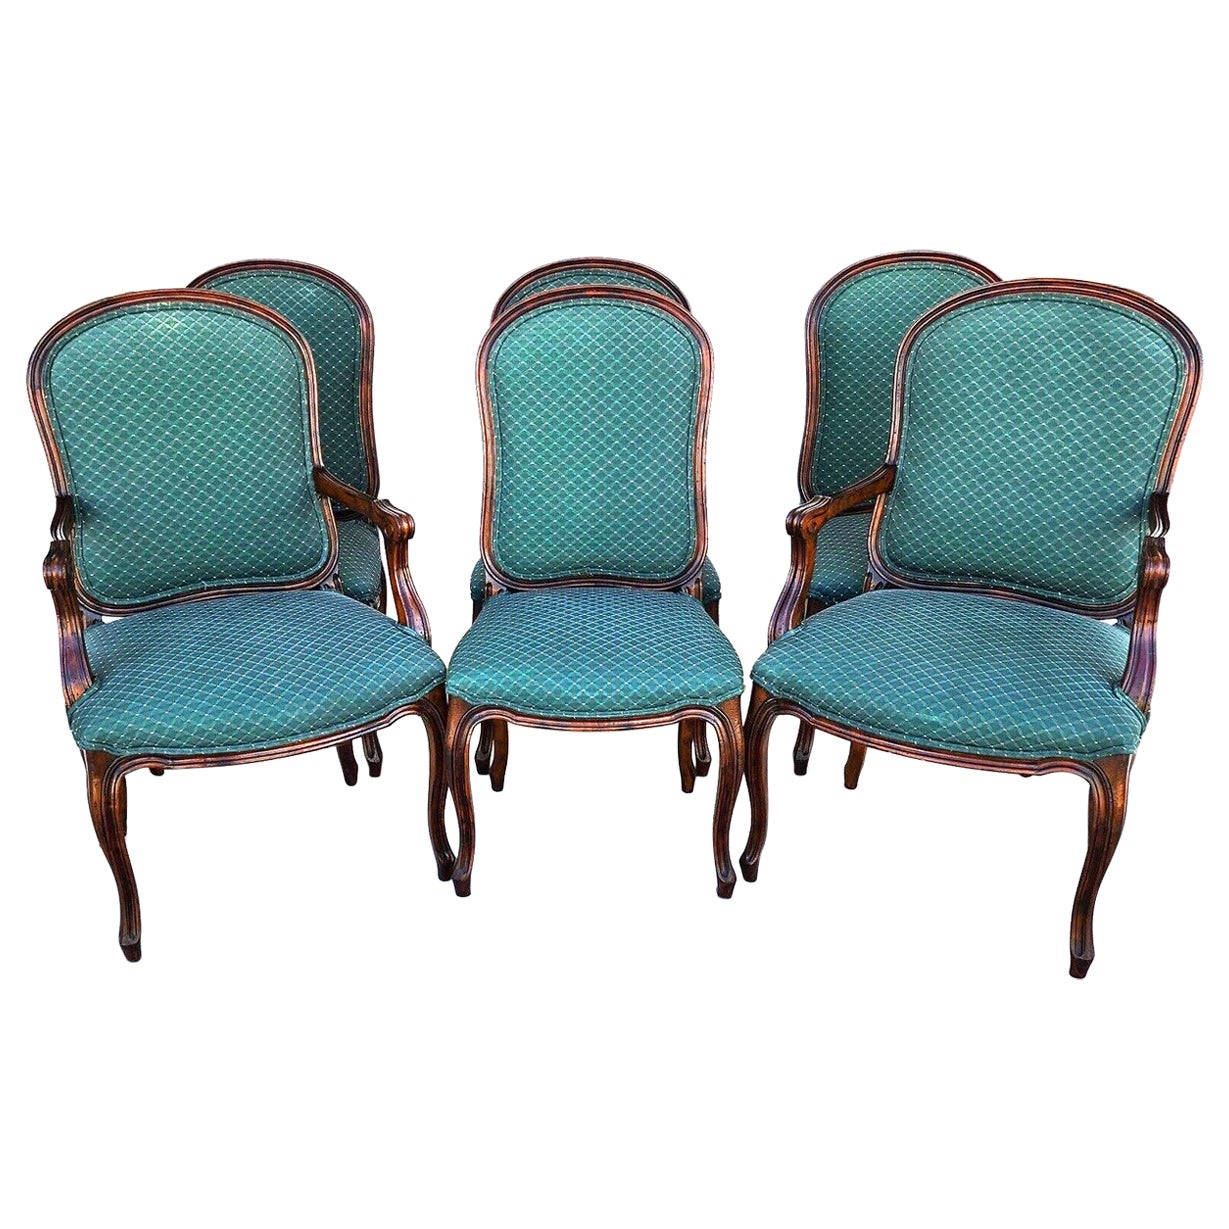 Antique French Dining Chairs Walnut, Set of 6